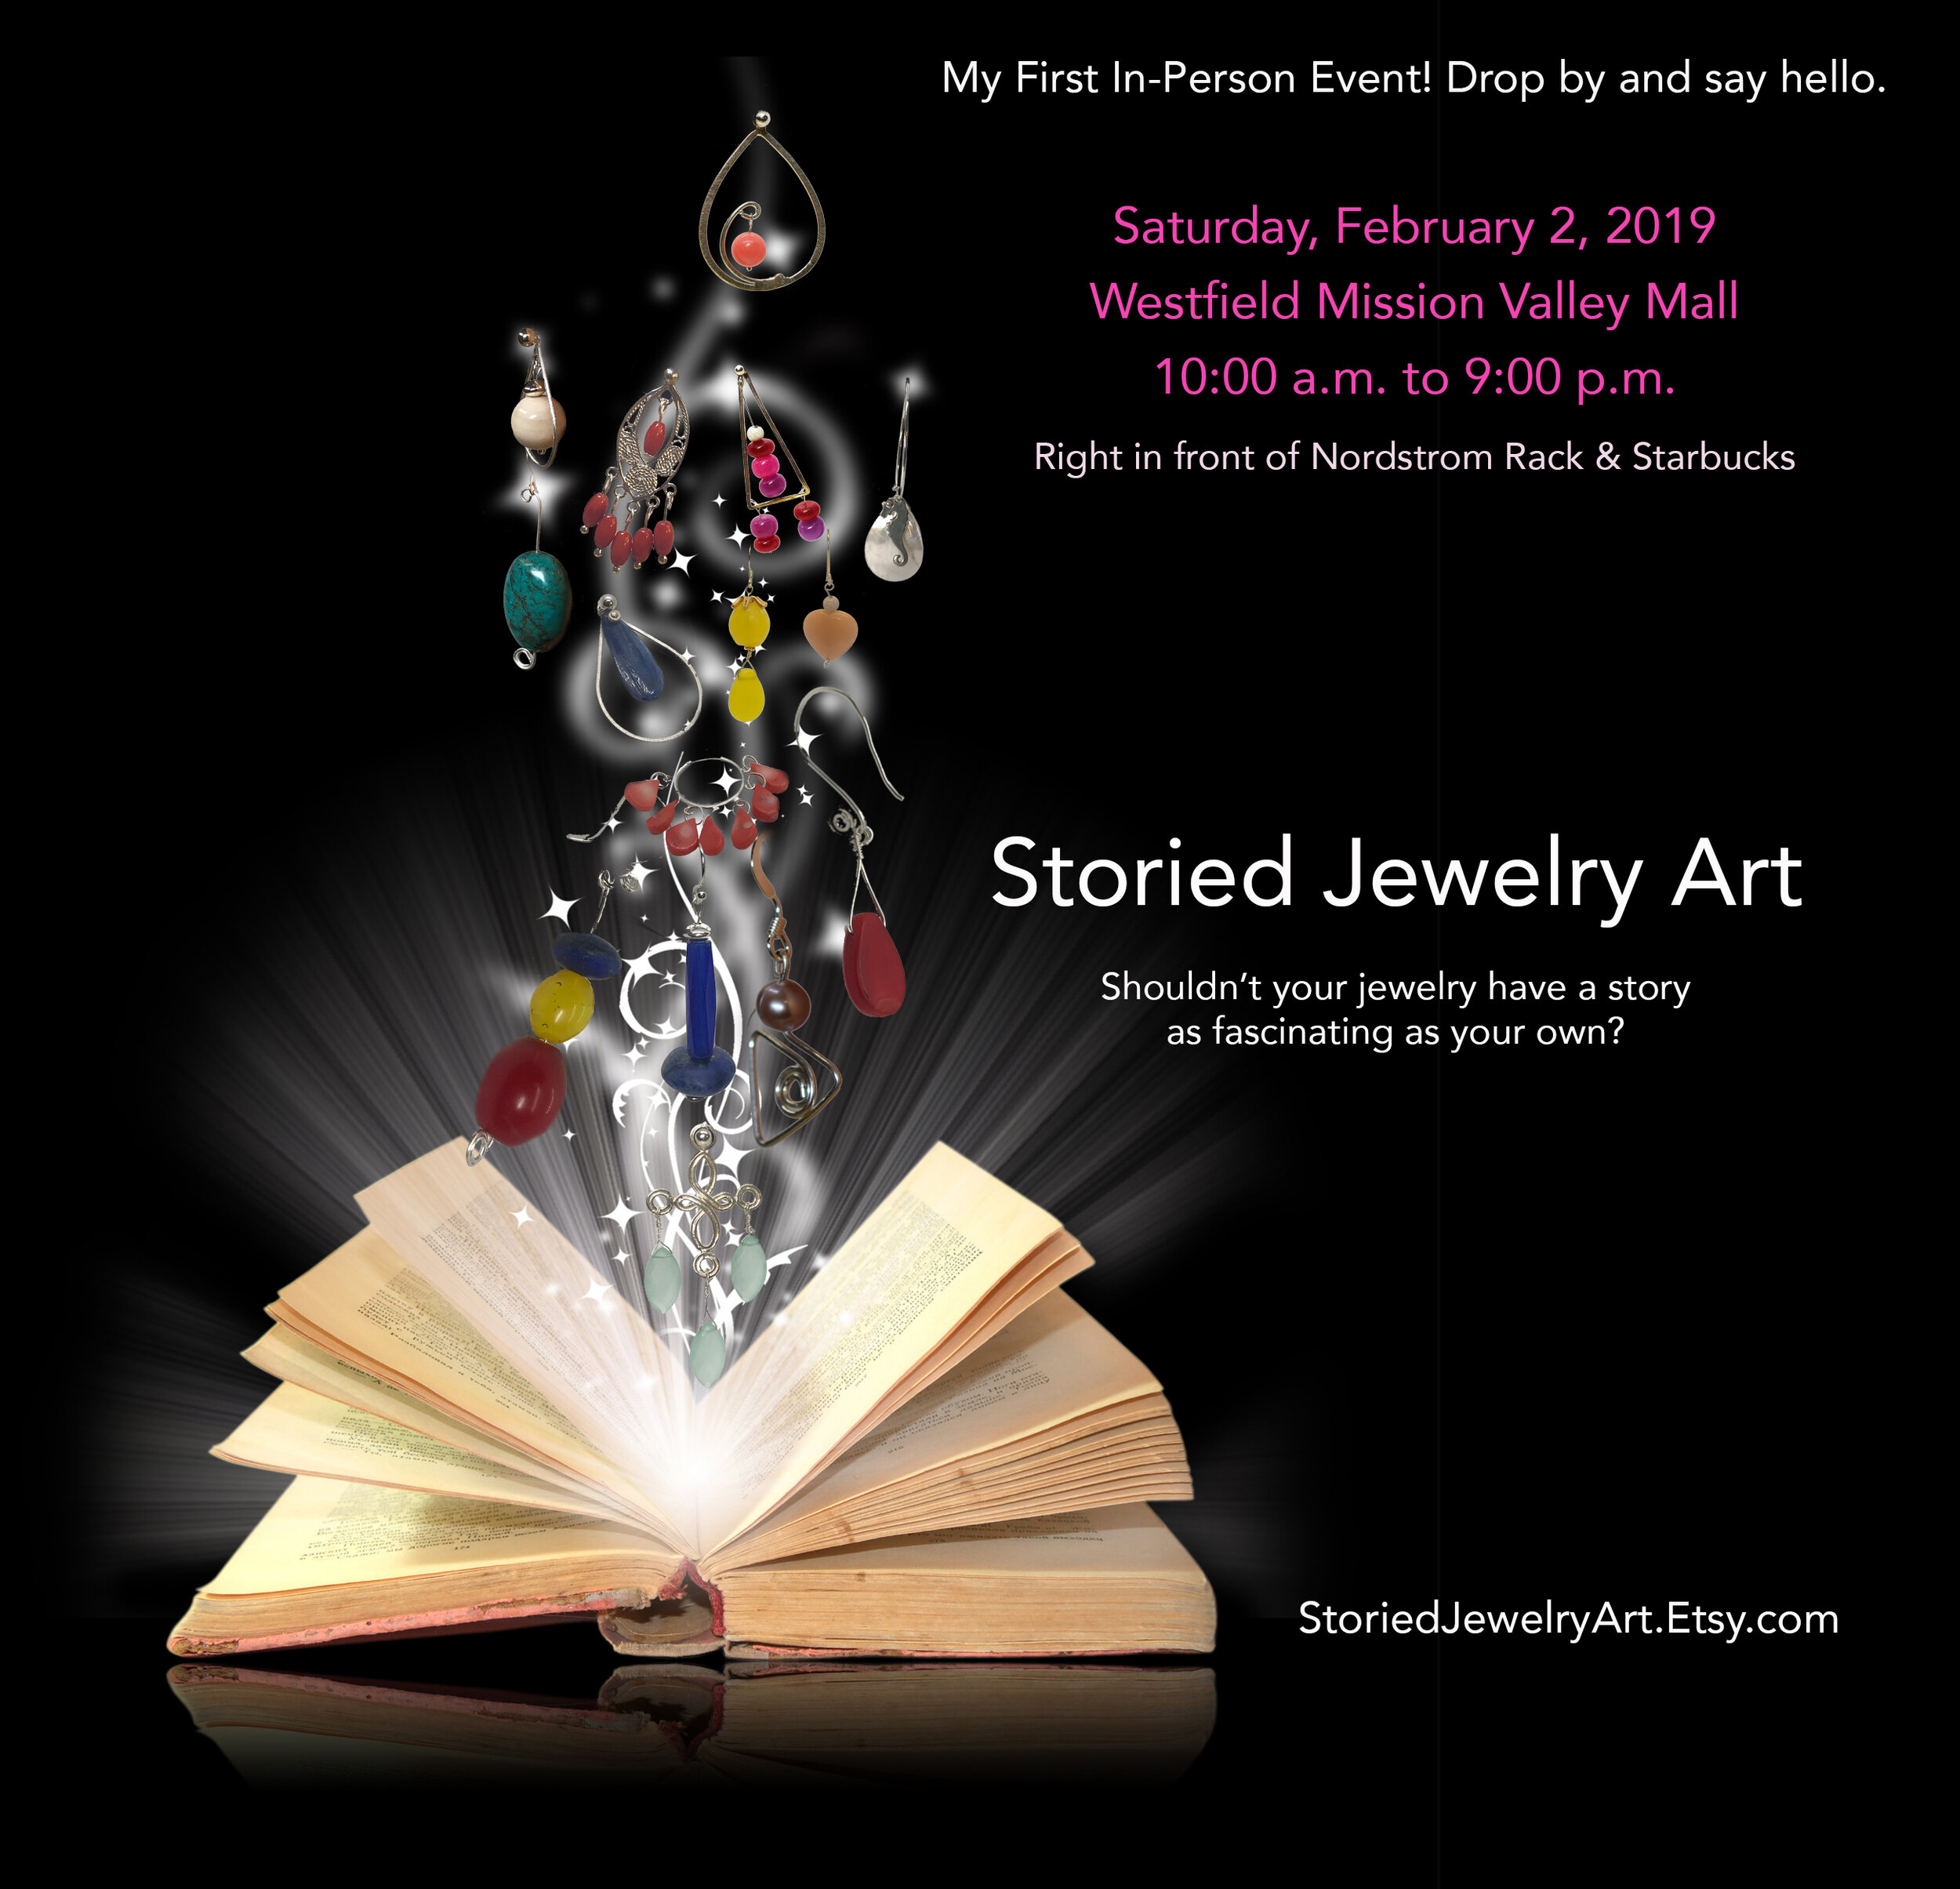 Promotional design for my jewelry business, Storied Jewelry Art.